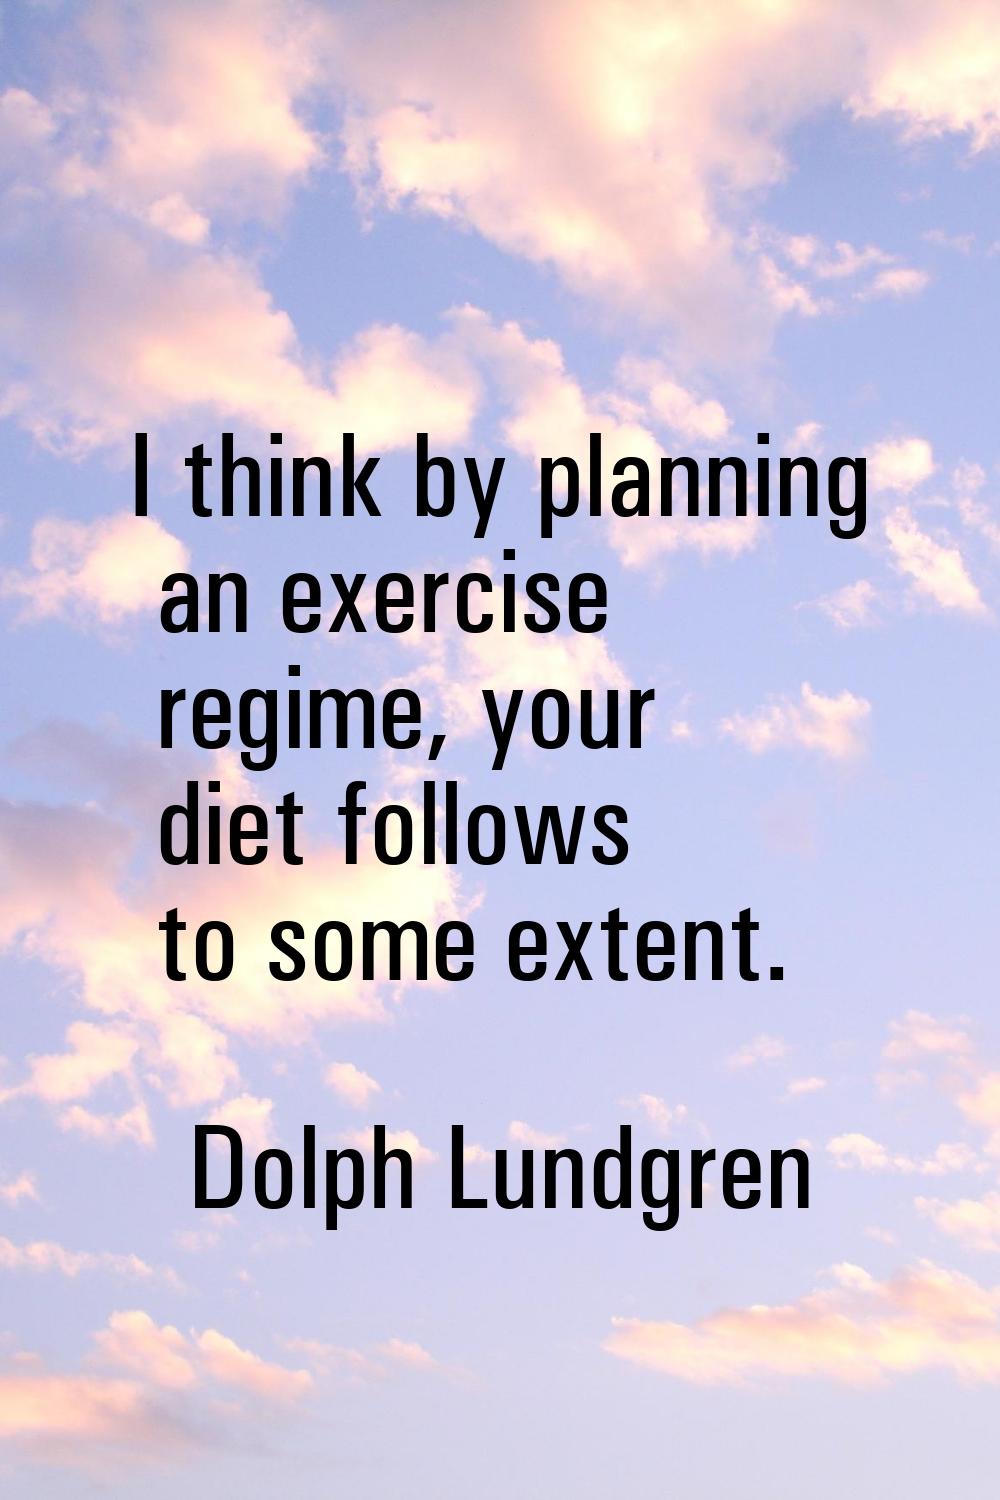 I think by planning an exercise regime, your diet follows to some extent.